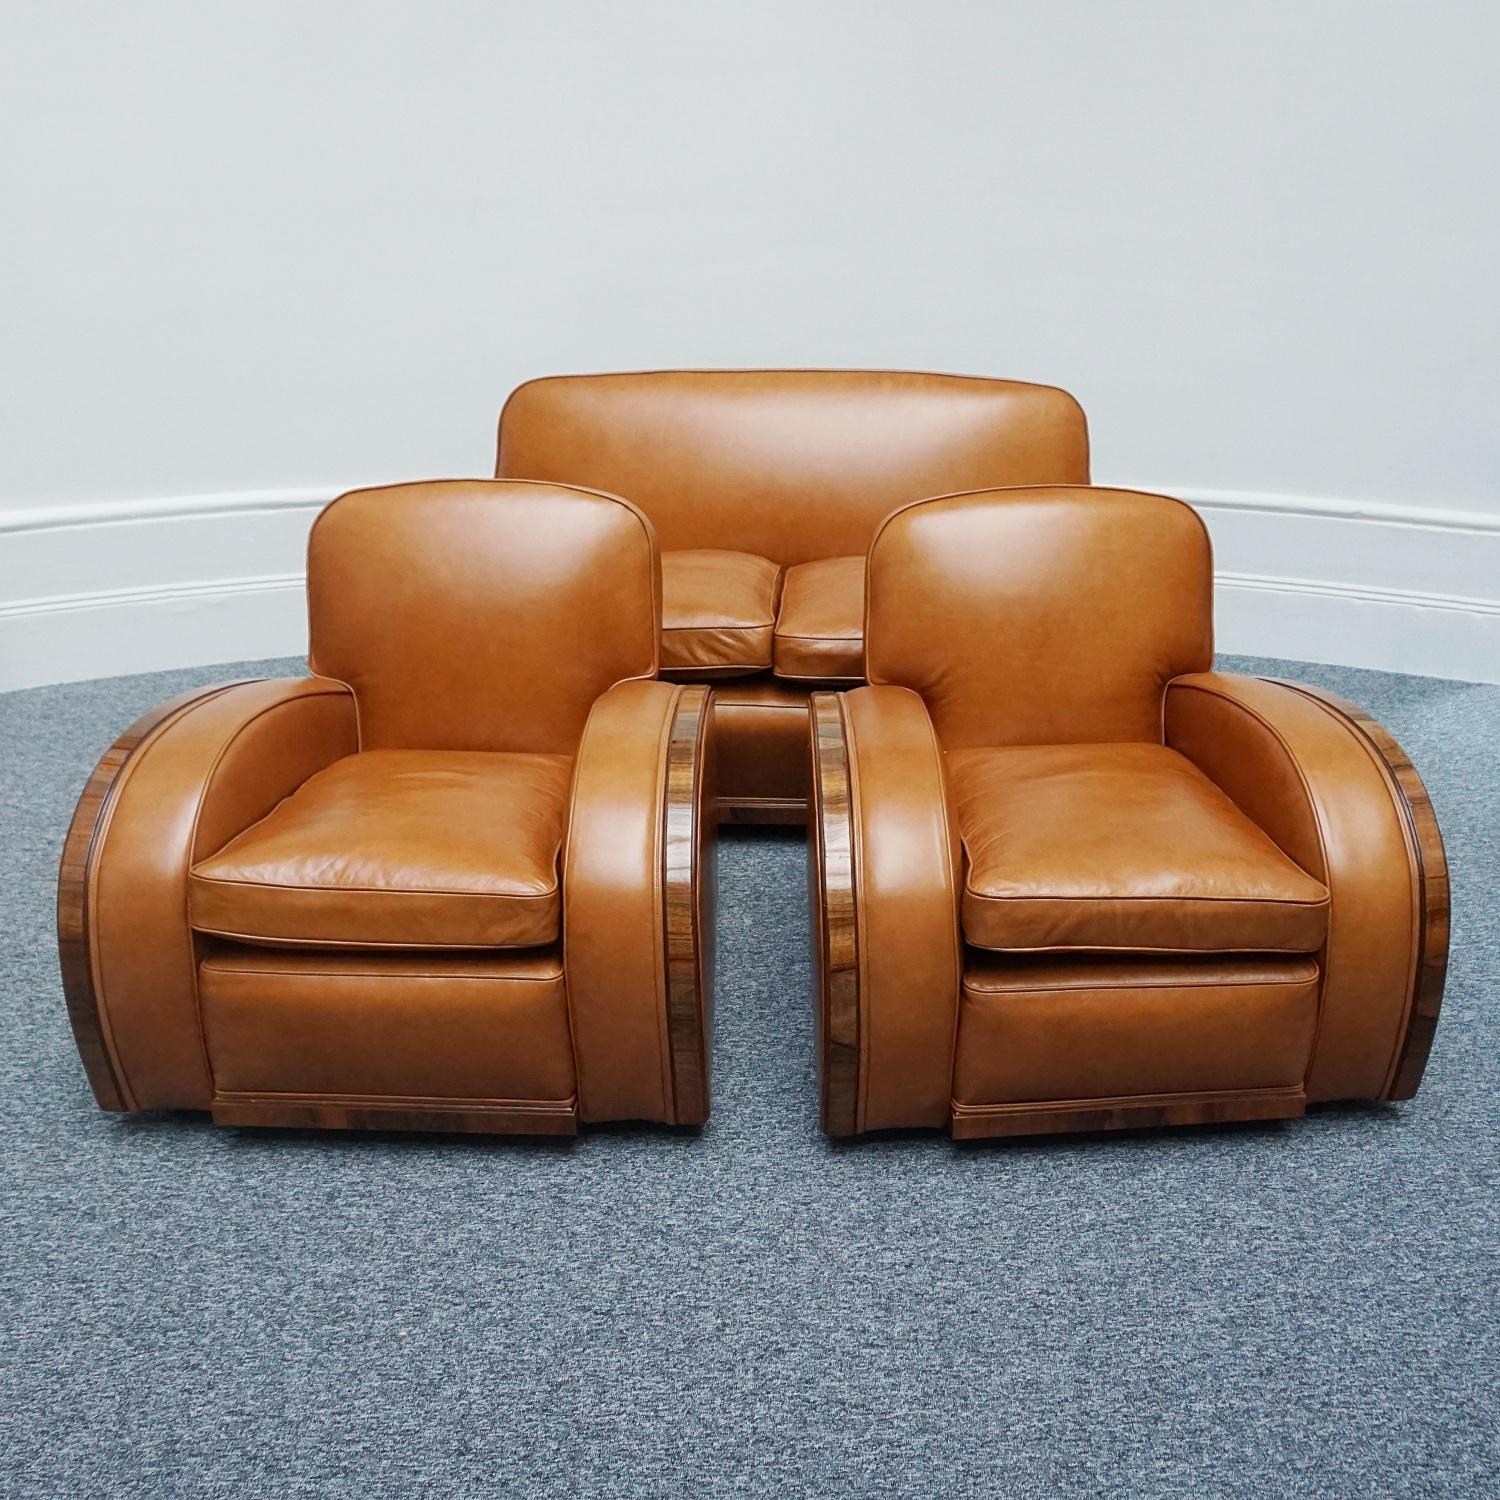 An Art Deco three piece tank suite by Heal's of London. Comprising a tank sofa and two tank chairs. Figured walnut banding throughout with light brown leather re-upholstery. Set over vintage castors. 

Dimensions: Sofa H 76cm W 164cm D 81cm Chairs